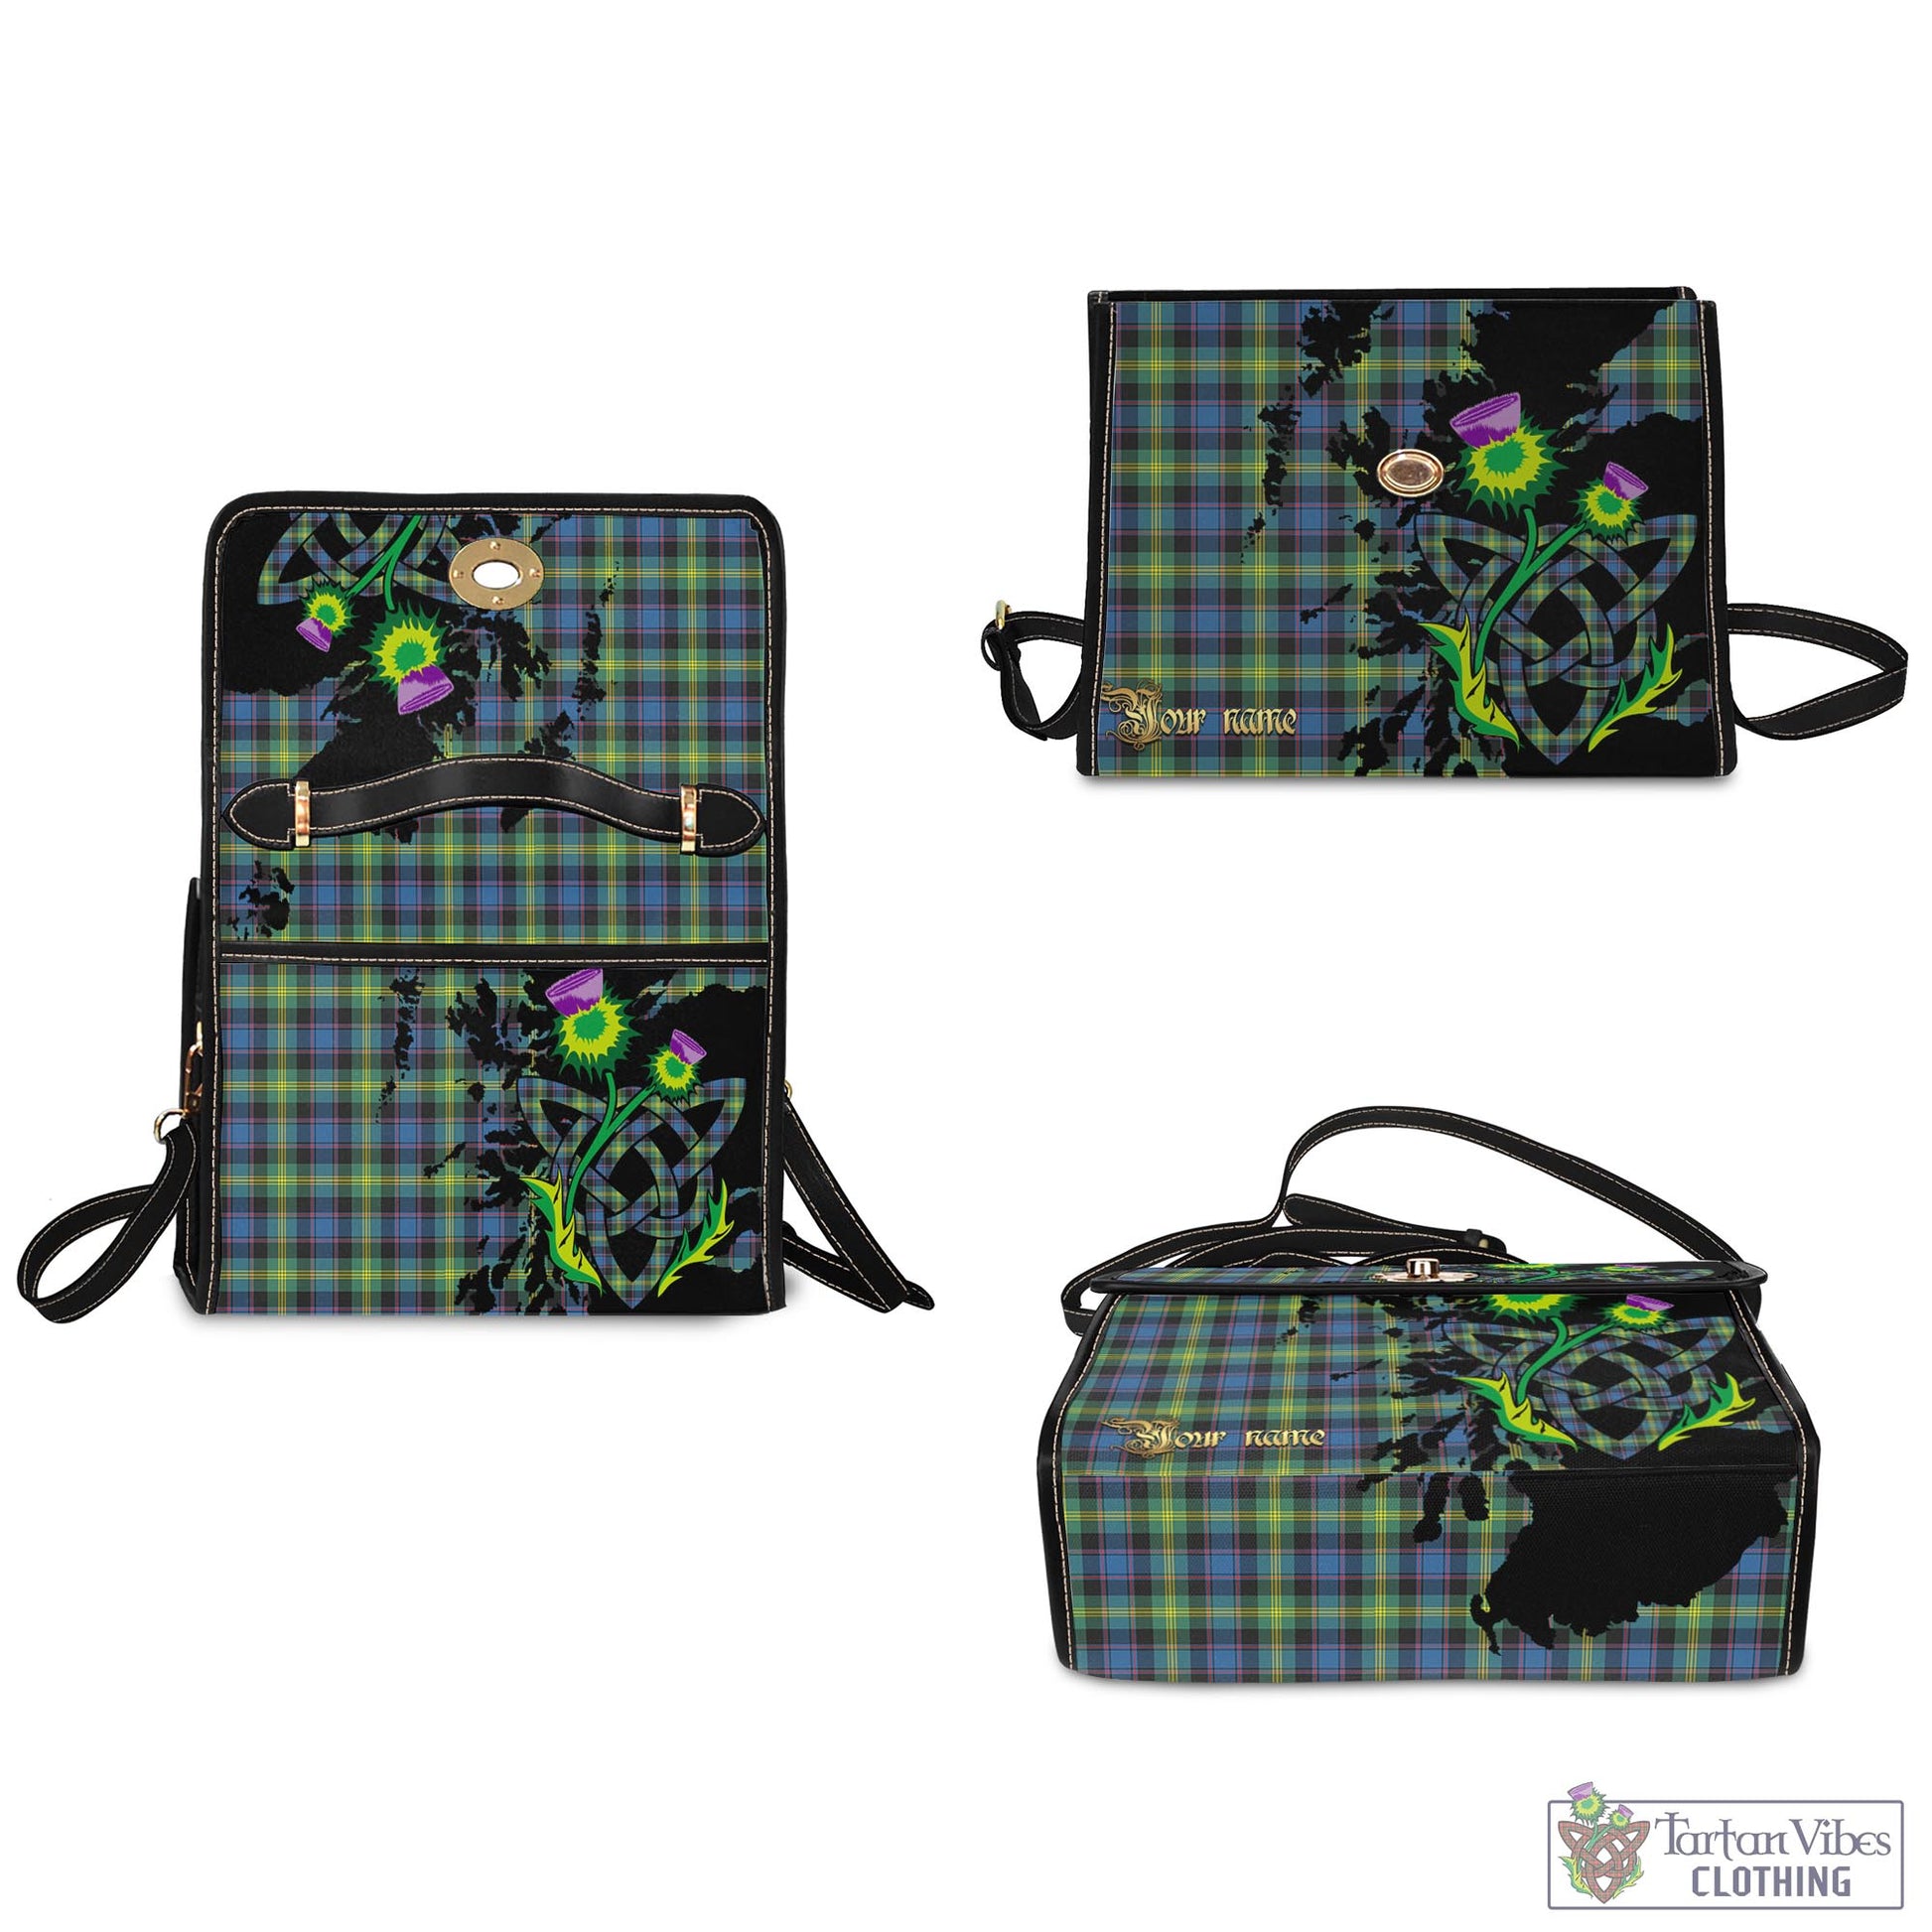 Tartan Vibes Clothing Watson Ancient Tartan Waterproof Canvas Bag with Scotland Map and Thistle Celtic Accents